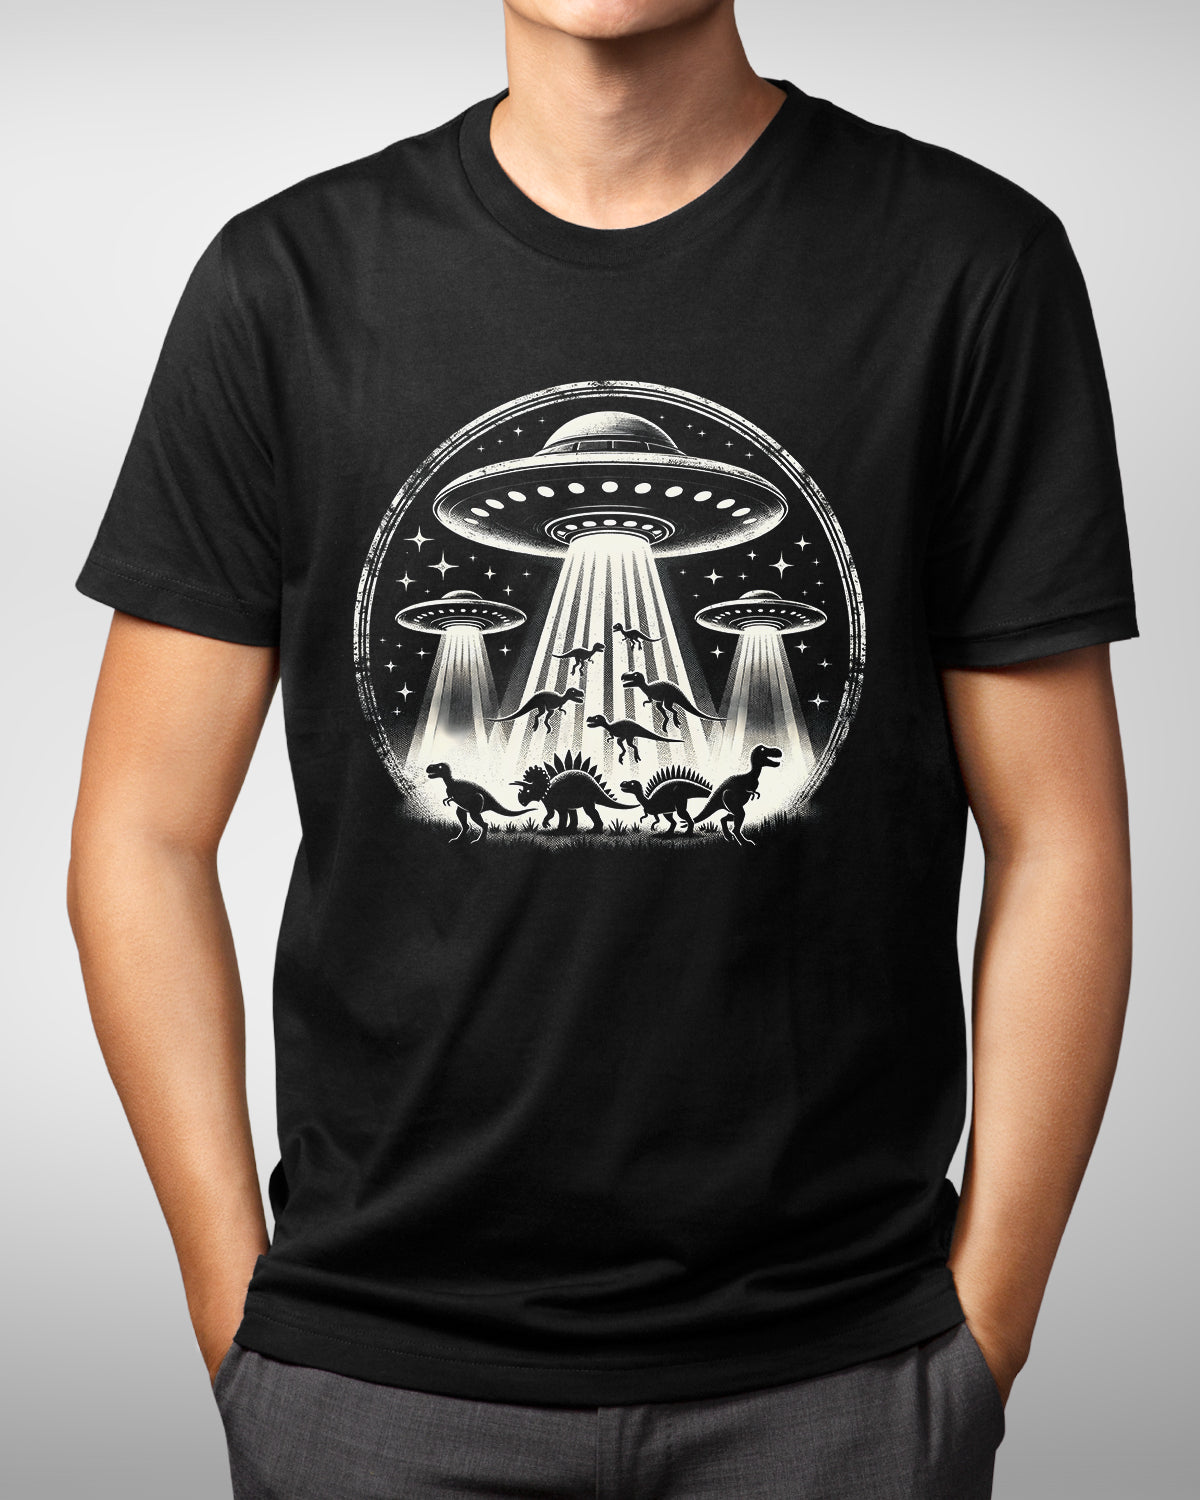 Funny Dinosaur UFO Abduction Shirt, Extraterrestrial Alien Tee for Dinosaur Lovers, Flying Saucer & Conspiracy Theory Enthusiasts